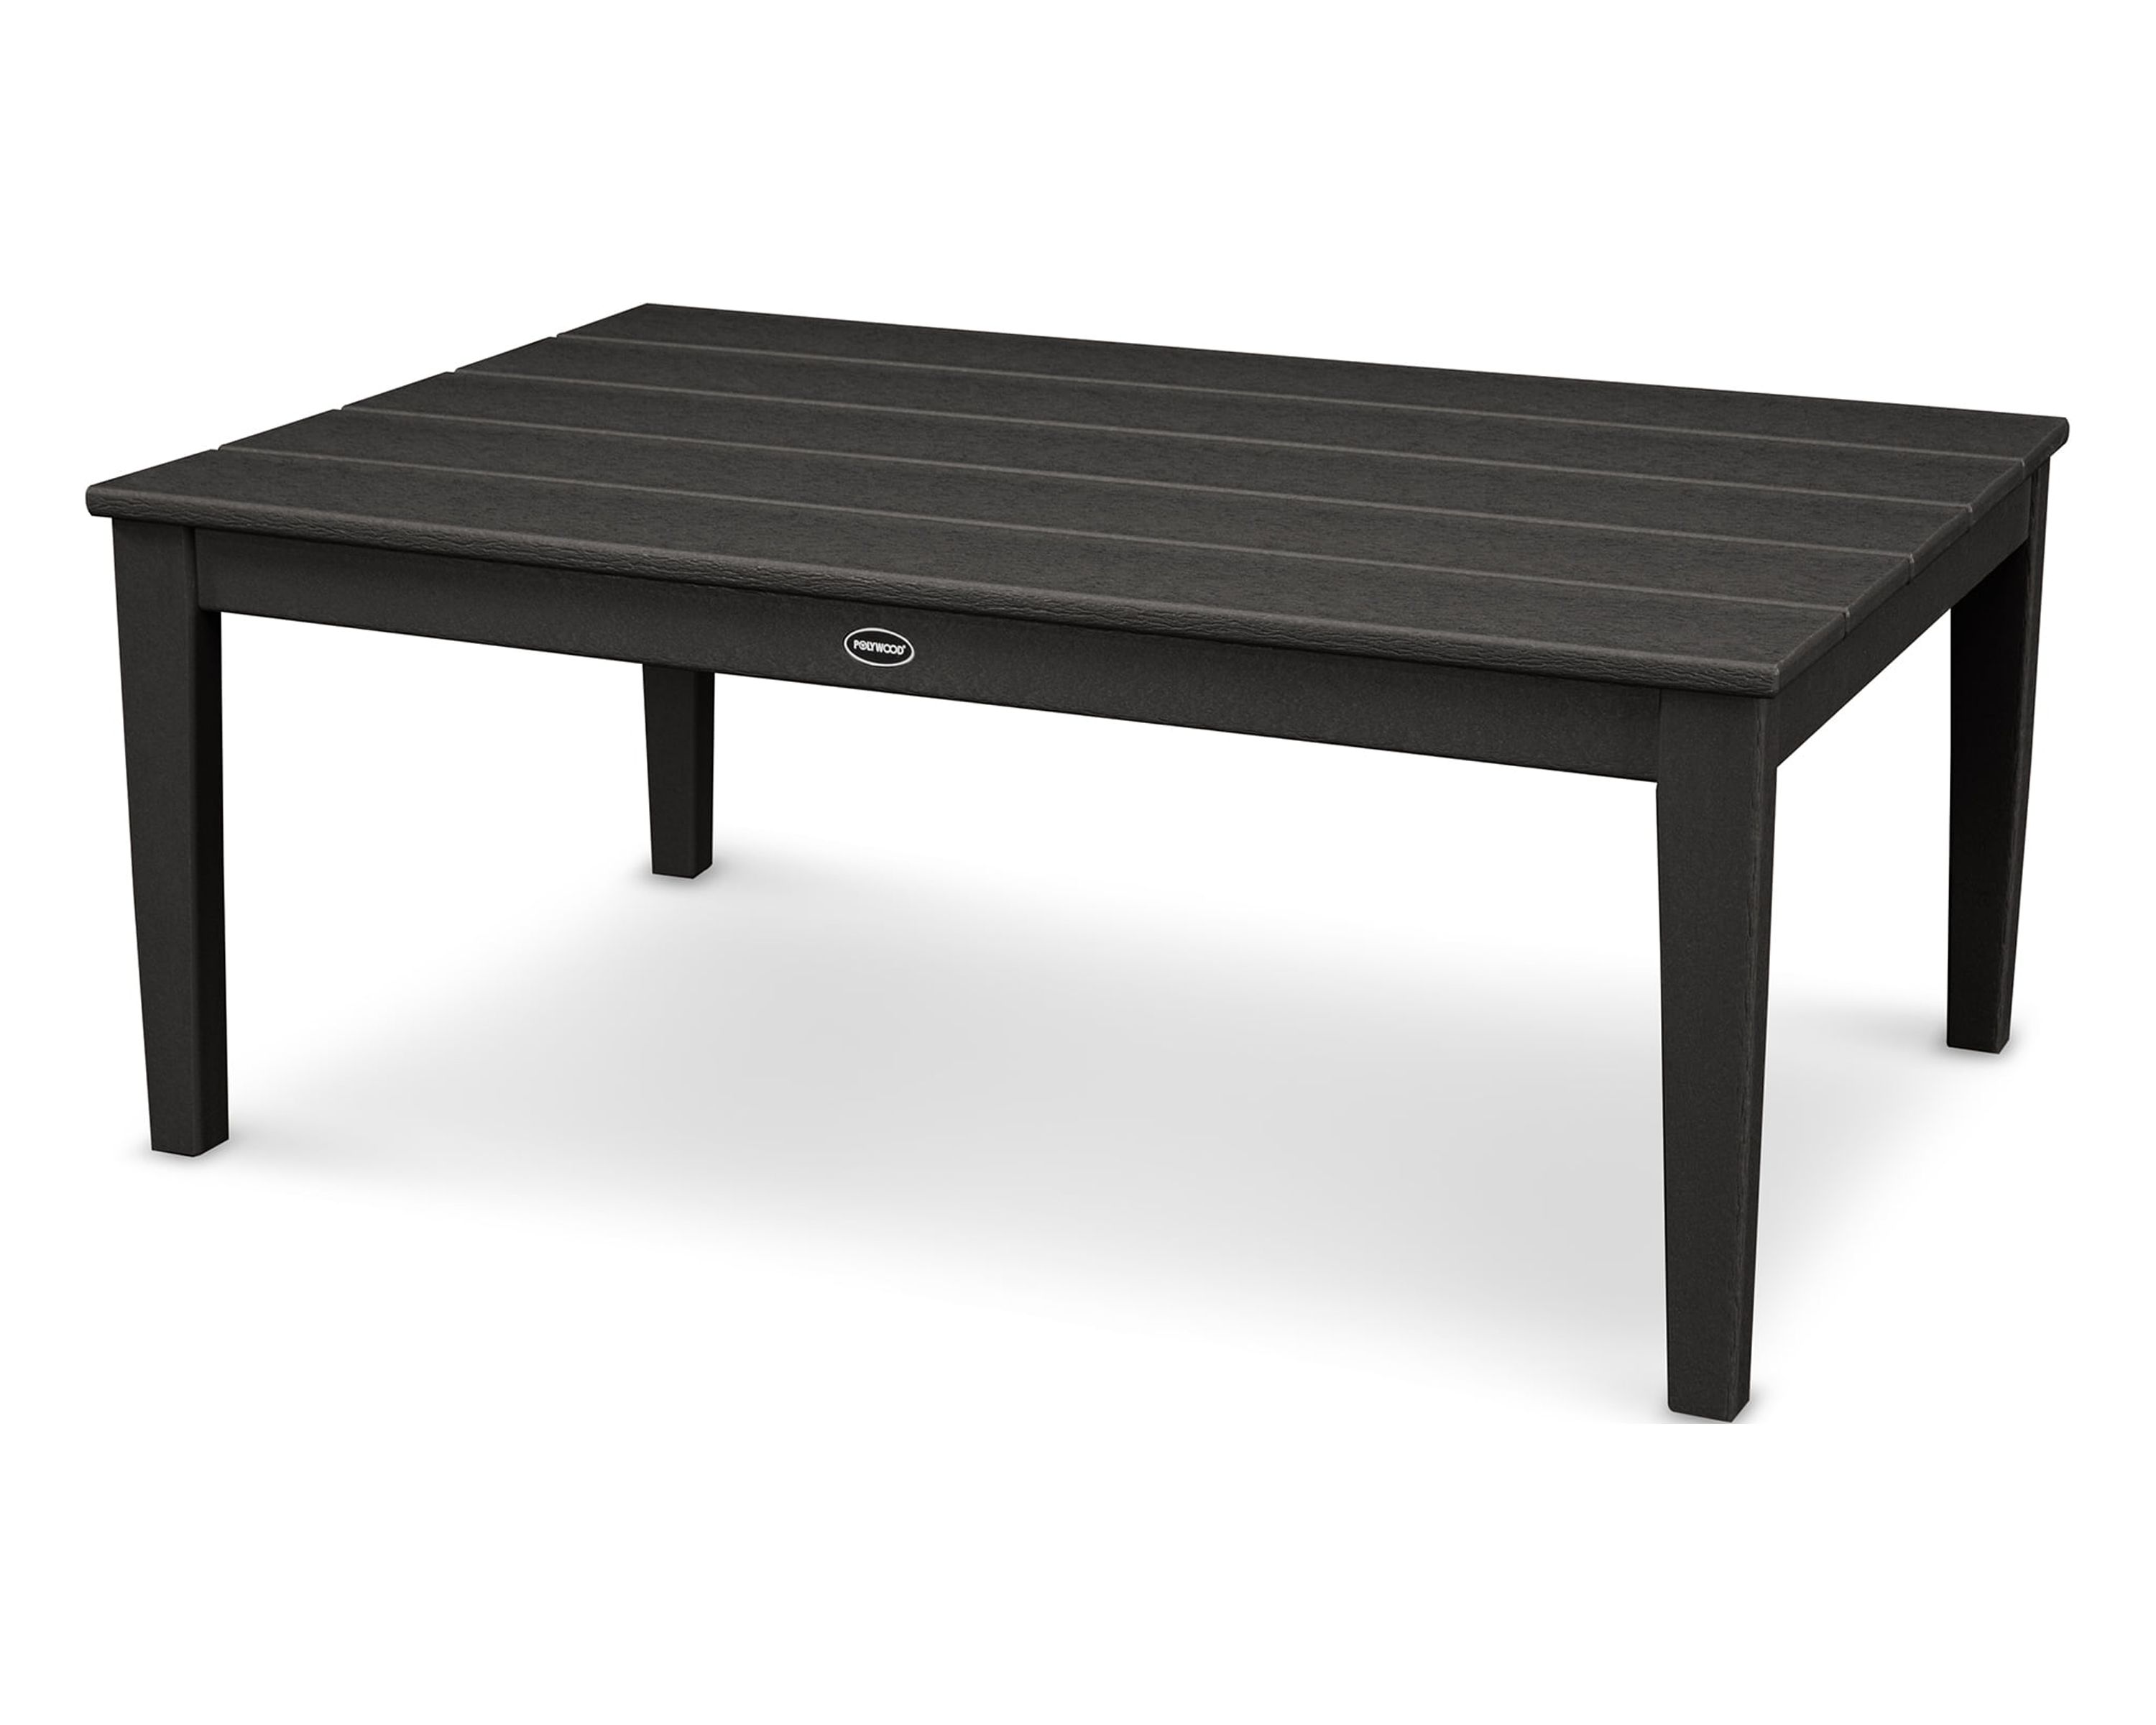 POLYWOOD Newport 28" x 42" Coffee Table in Black - image 1 of 2